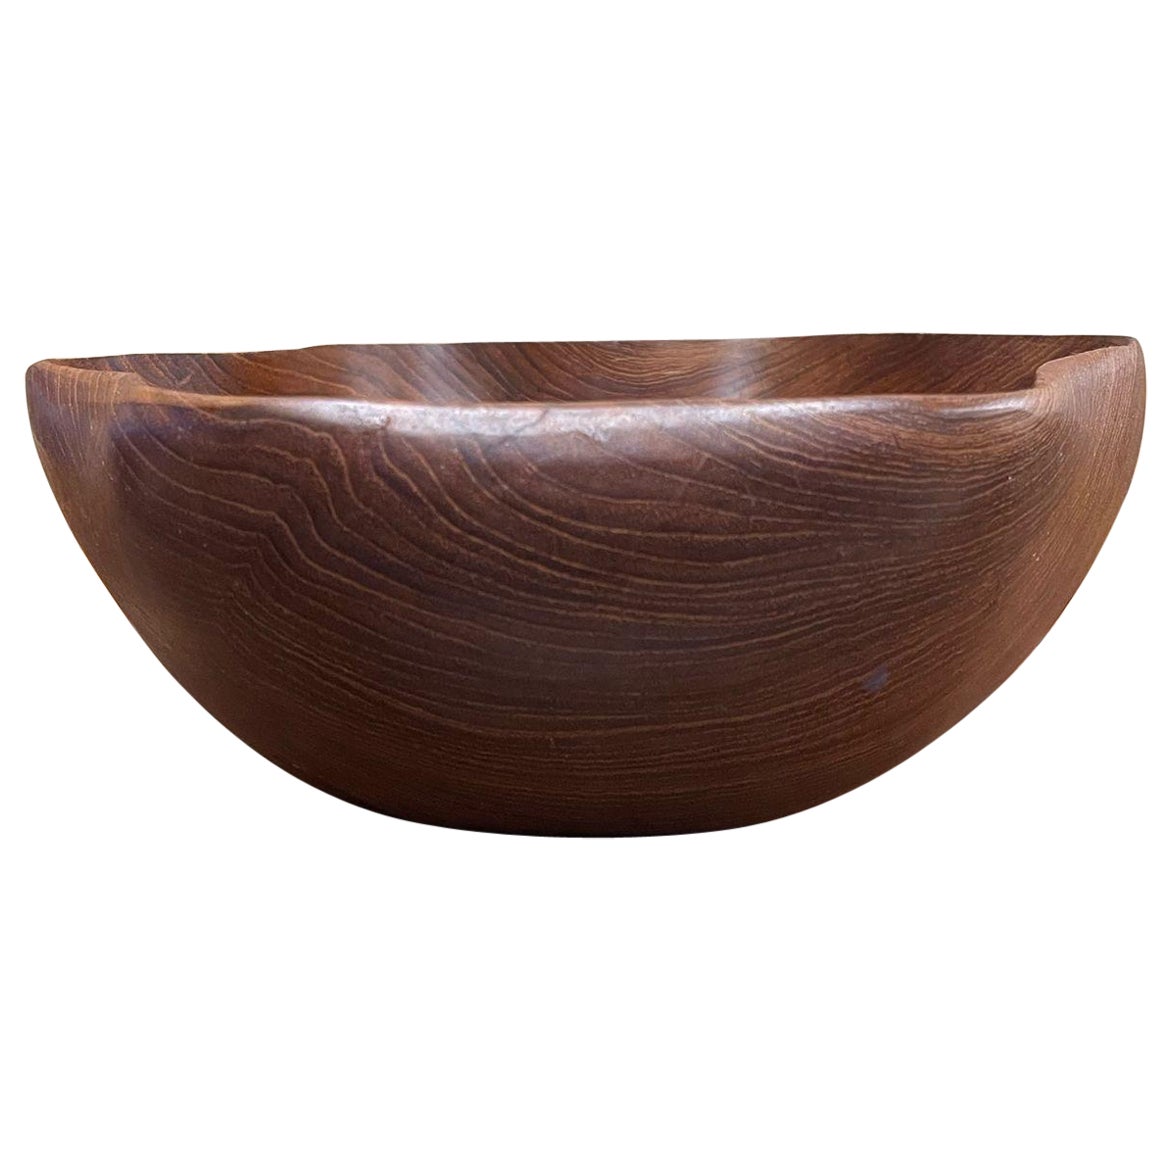 Vintage Wooden Bowl With Rounded Curved Edges.